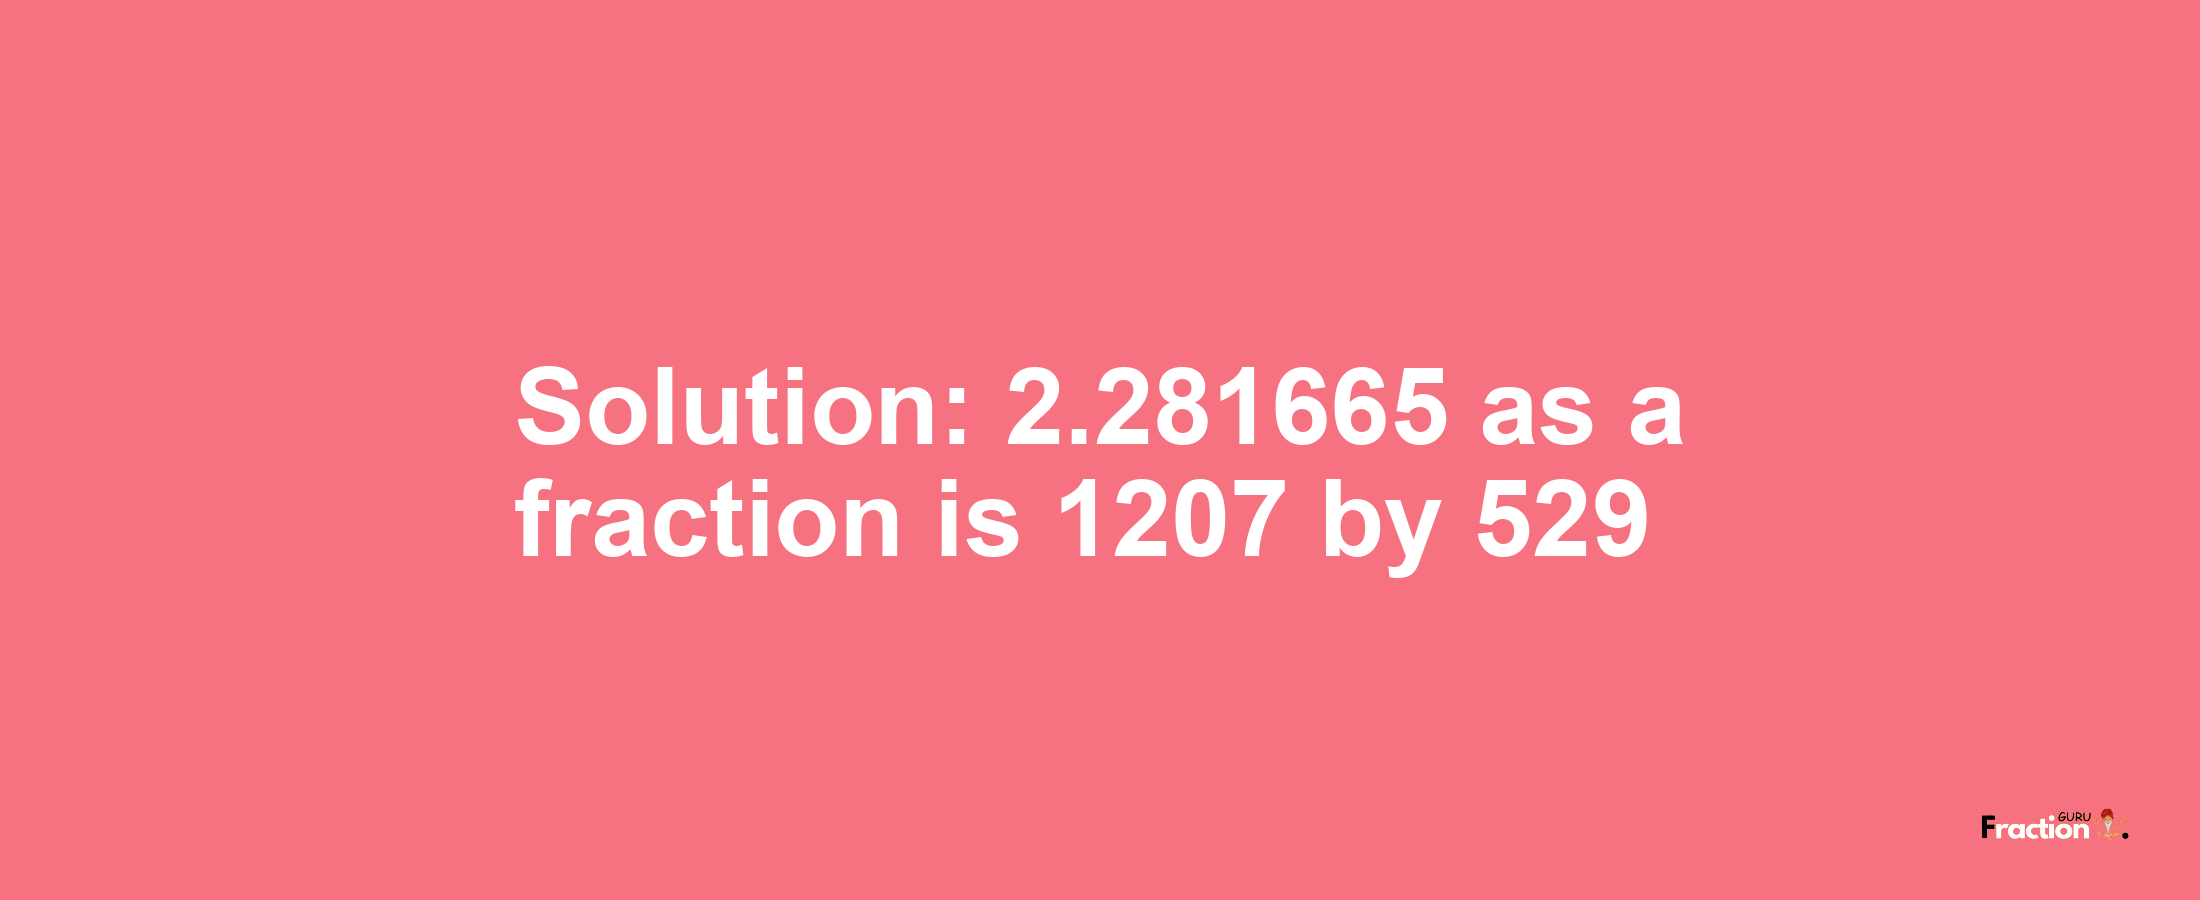 Solution:2.281665 as a fraction is 1207/529